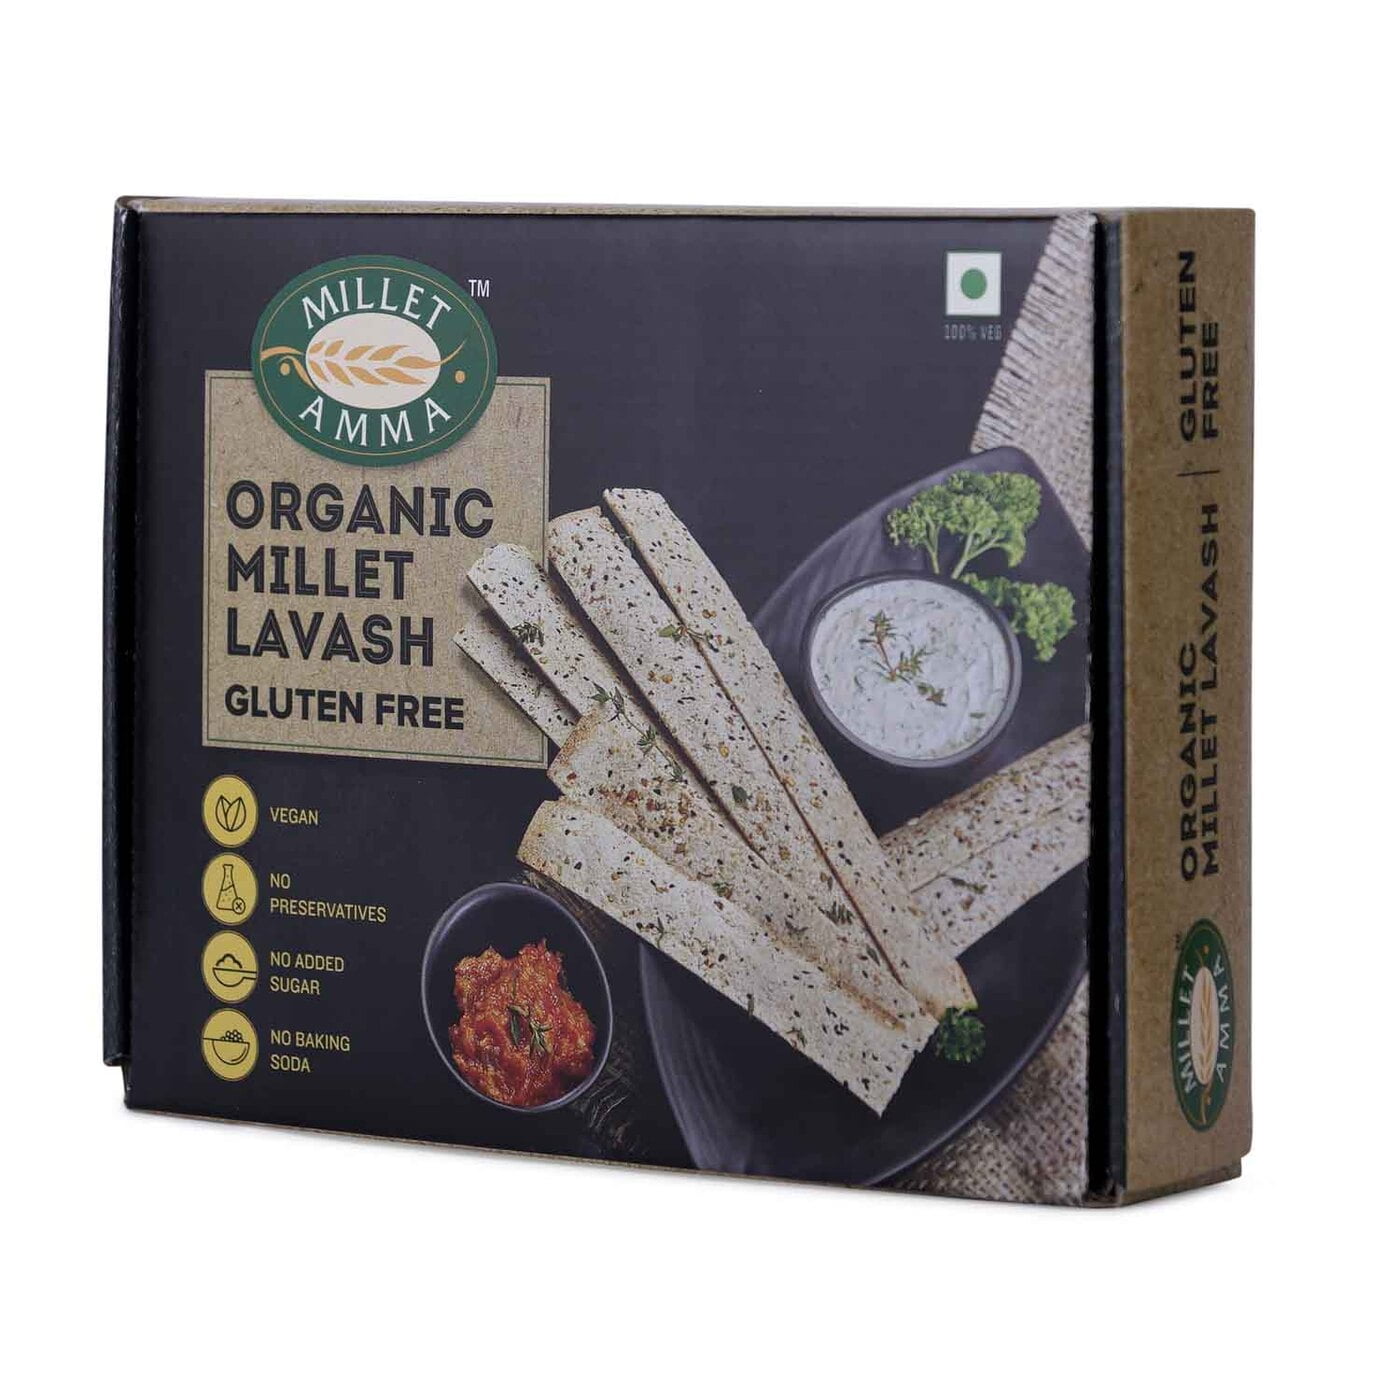 Millet Amma’s Gluten-free Millet Lavash The search for a healthy snack you can binge on is over, introducing our gluten free Millet Lavash. This is a delicious snack you can binge on, guilt-free!  Made with Super Grains like Little Millet, Amaranth and Tapioca Flour, it is loaded with fiber, protein, iron and calcium. Our Millet Lavash is baked and has no oil, sugar or preservatives.